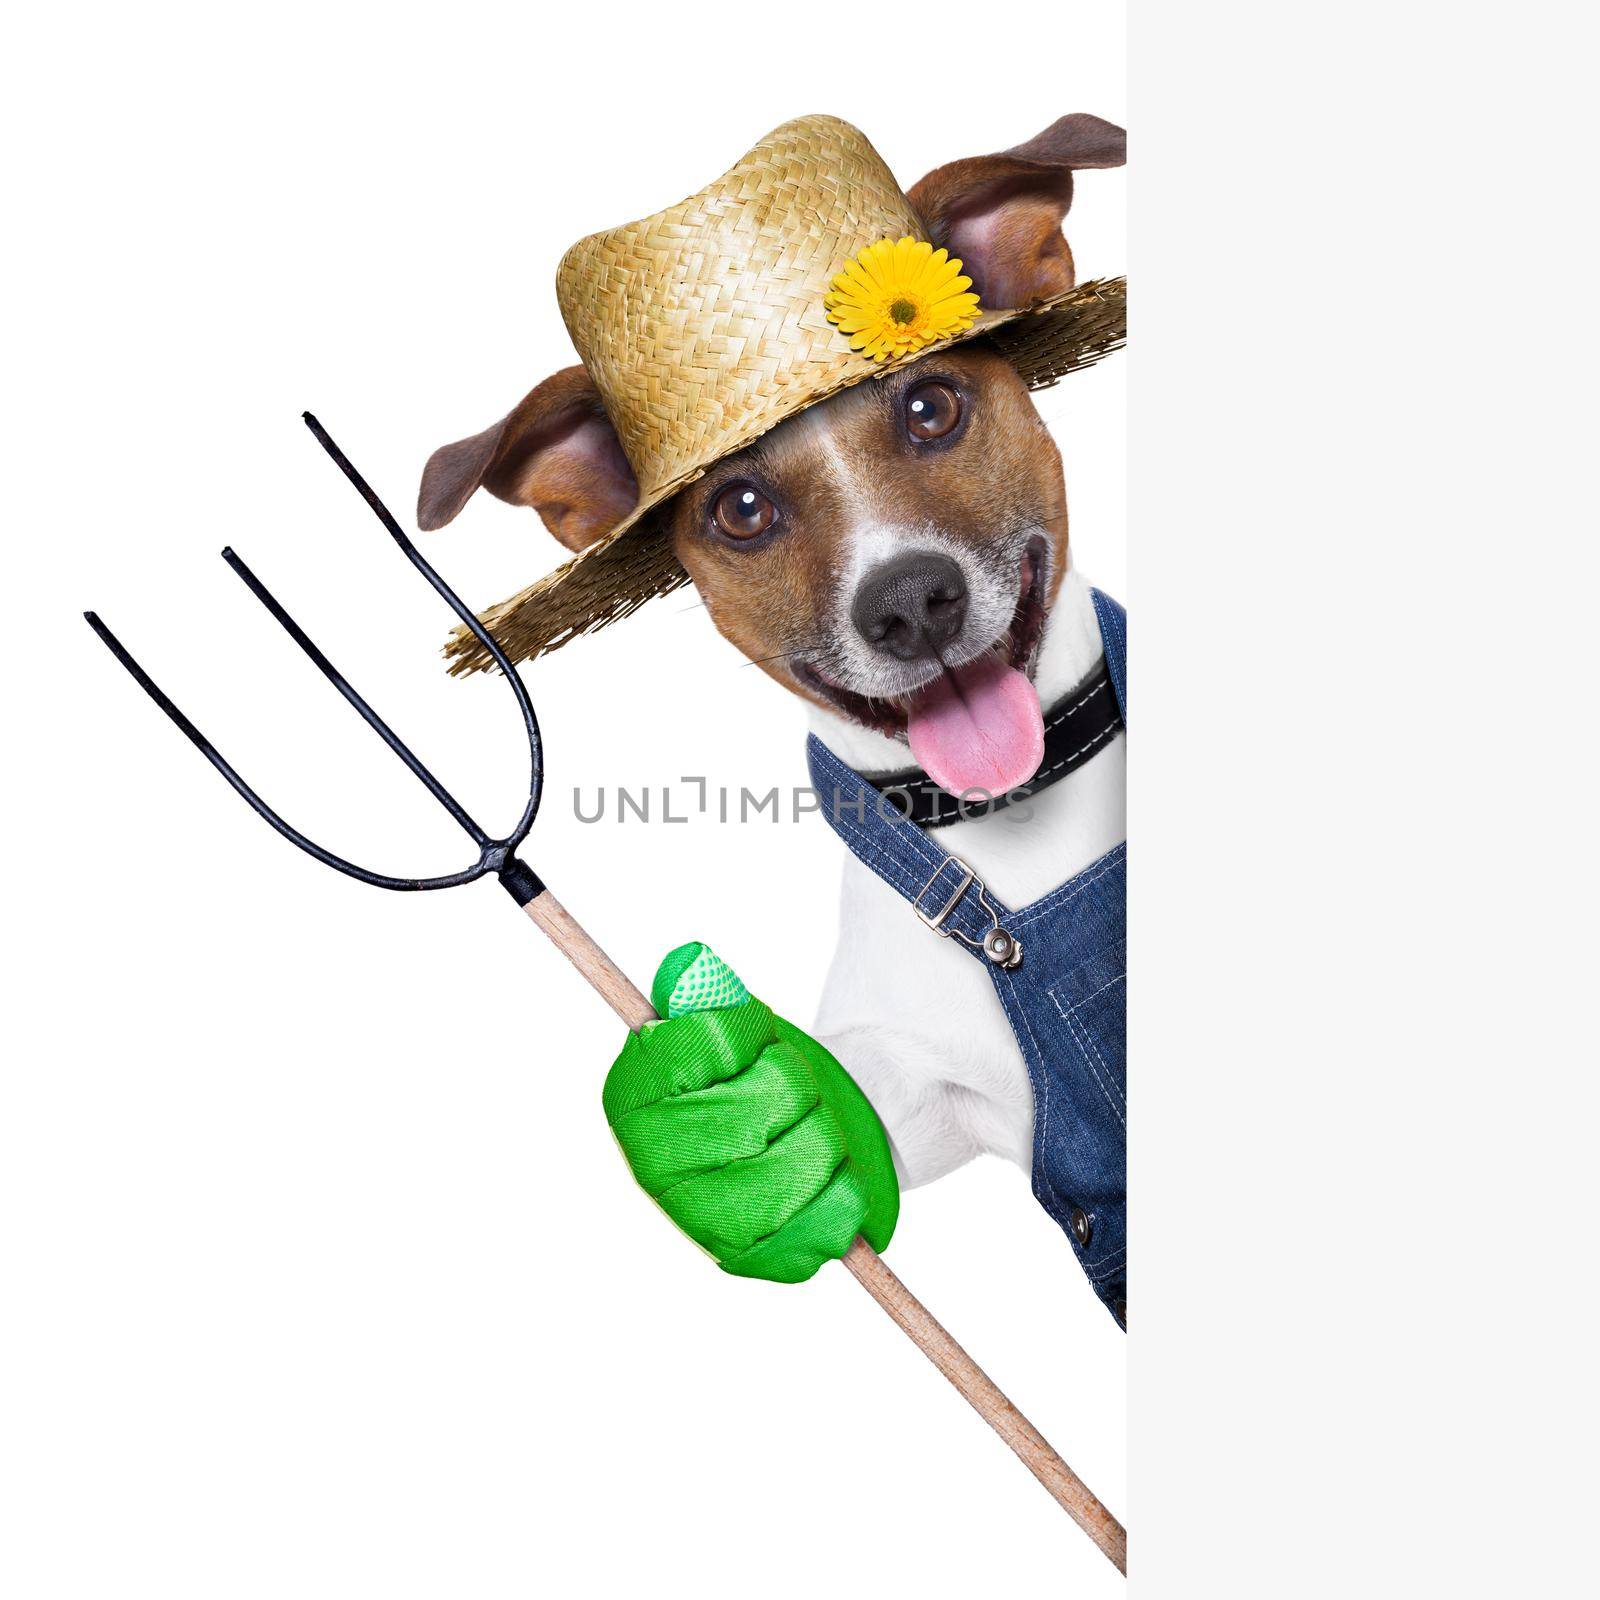 happy farmer dog with thumb up holding a pitchfork behind a placard